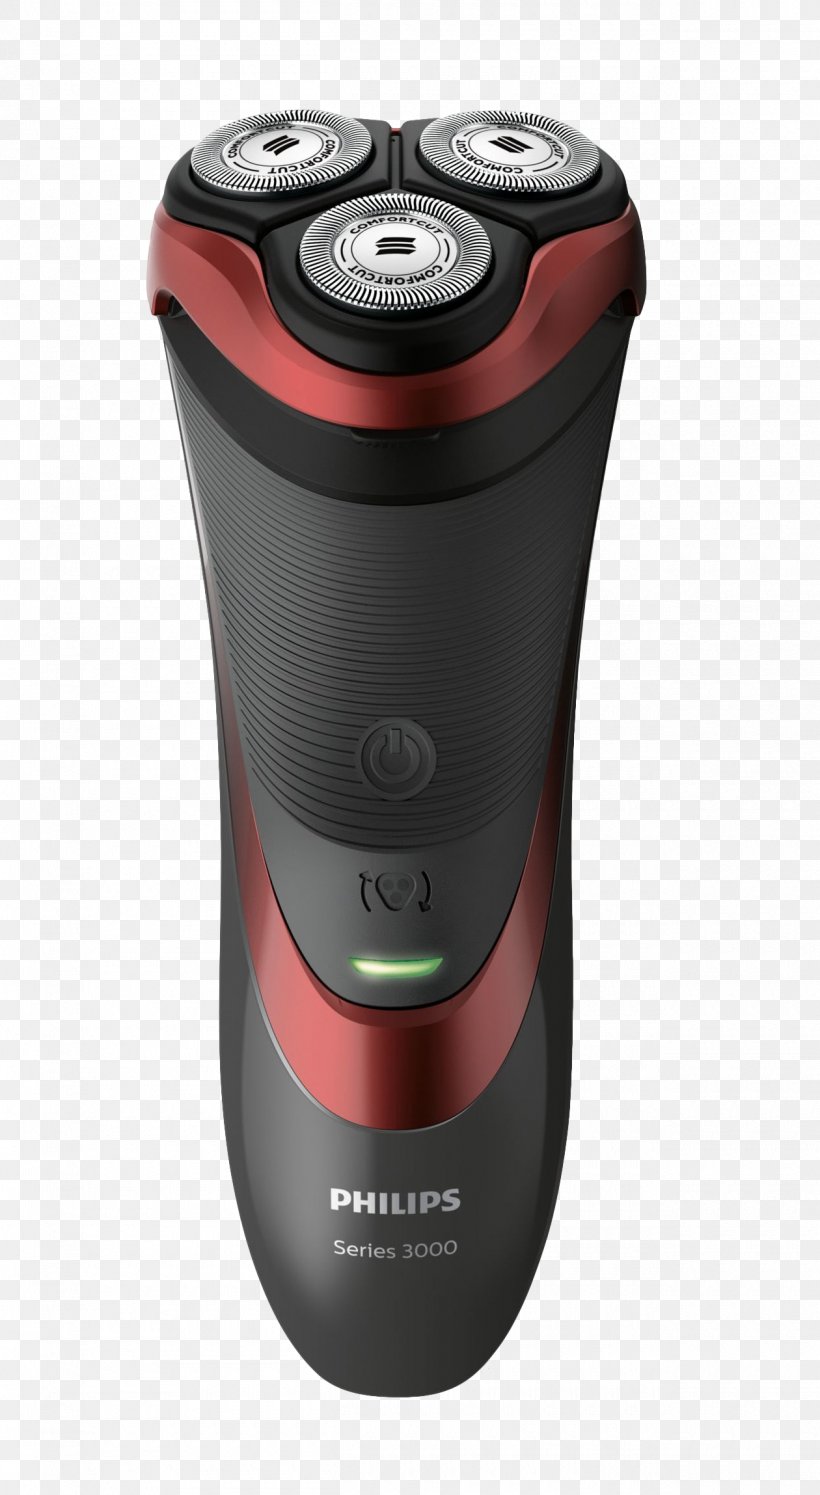 Electric Razors & Hair Trimmers Philips S3580 Rotary Shaver Philips Philips Hairclipper Series 3000, PNG, 1260x2298px, Electric Razors Hair Trimmers, Braun, Electricity, Multimedia, Personal Care Download Free